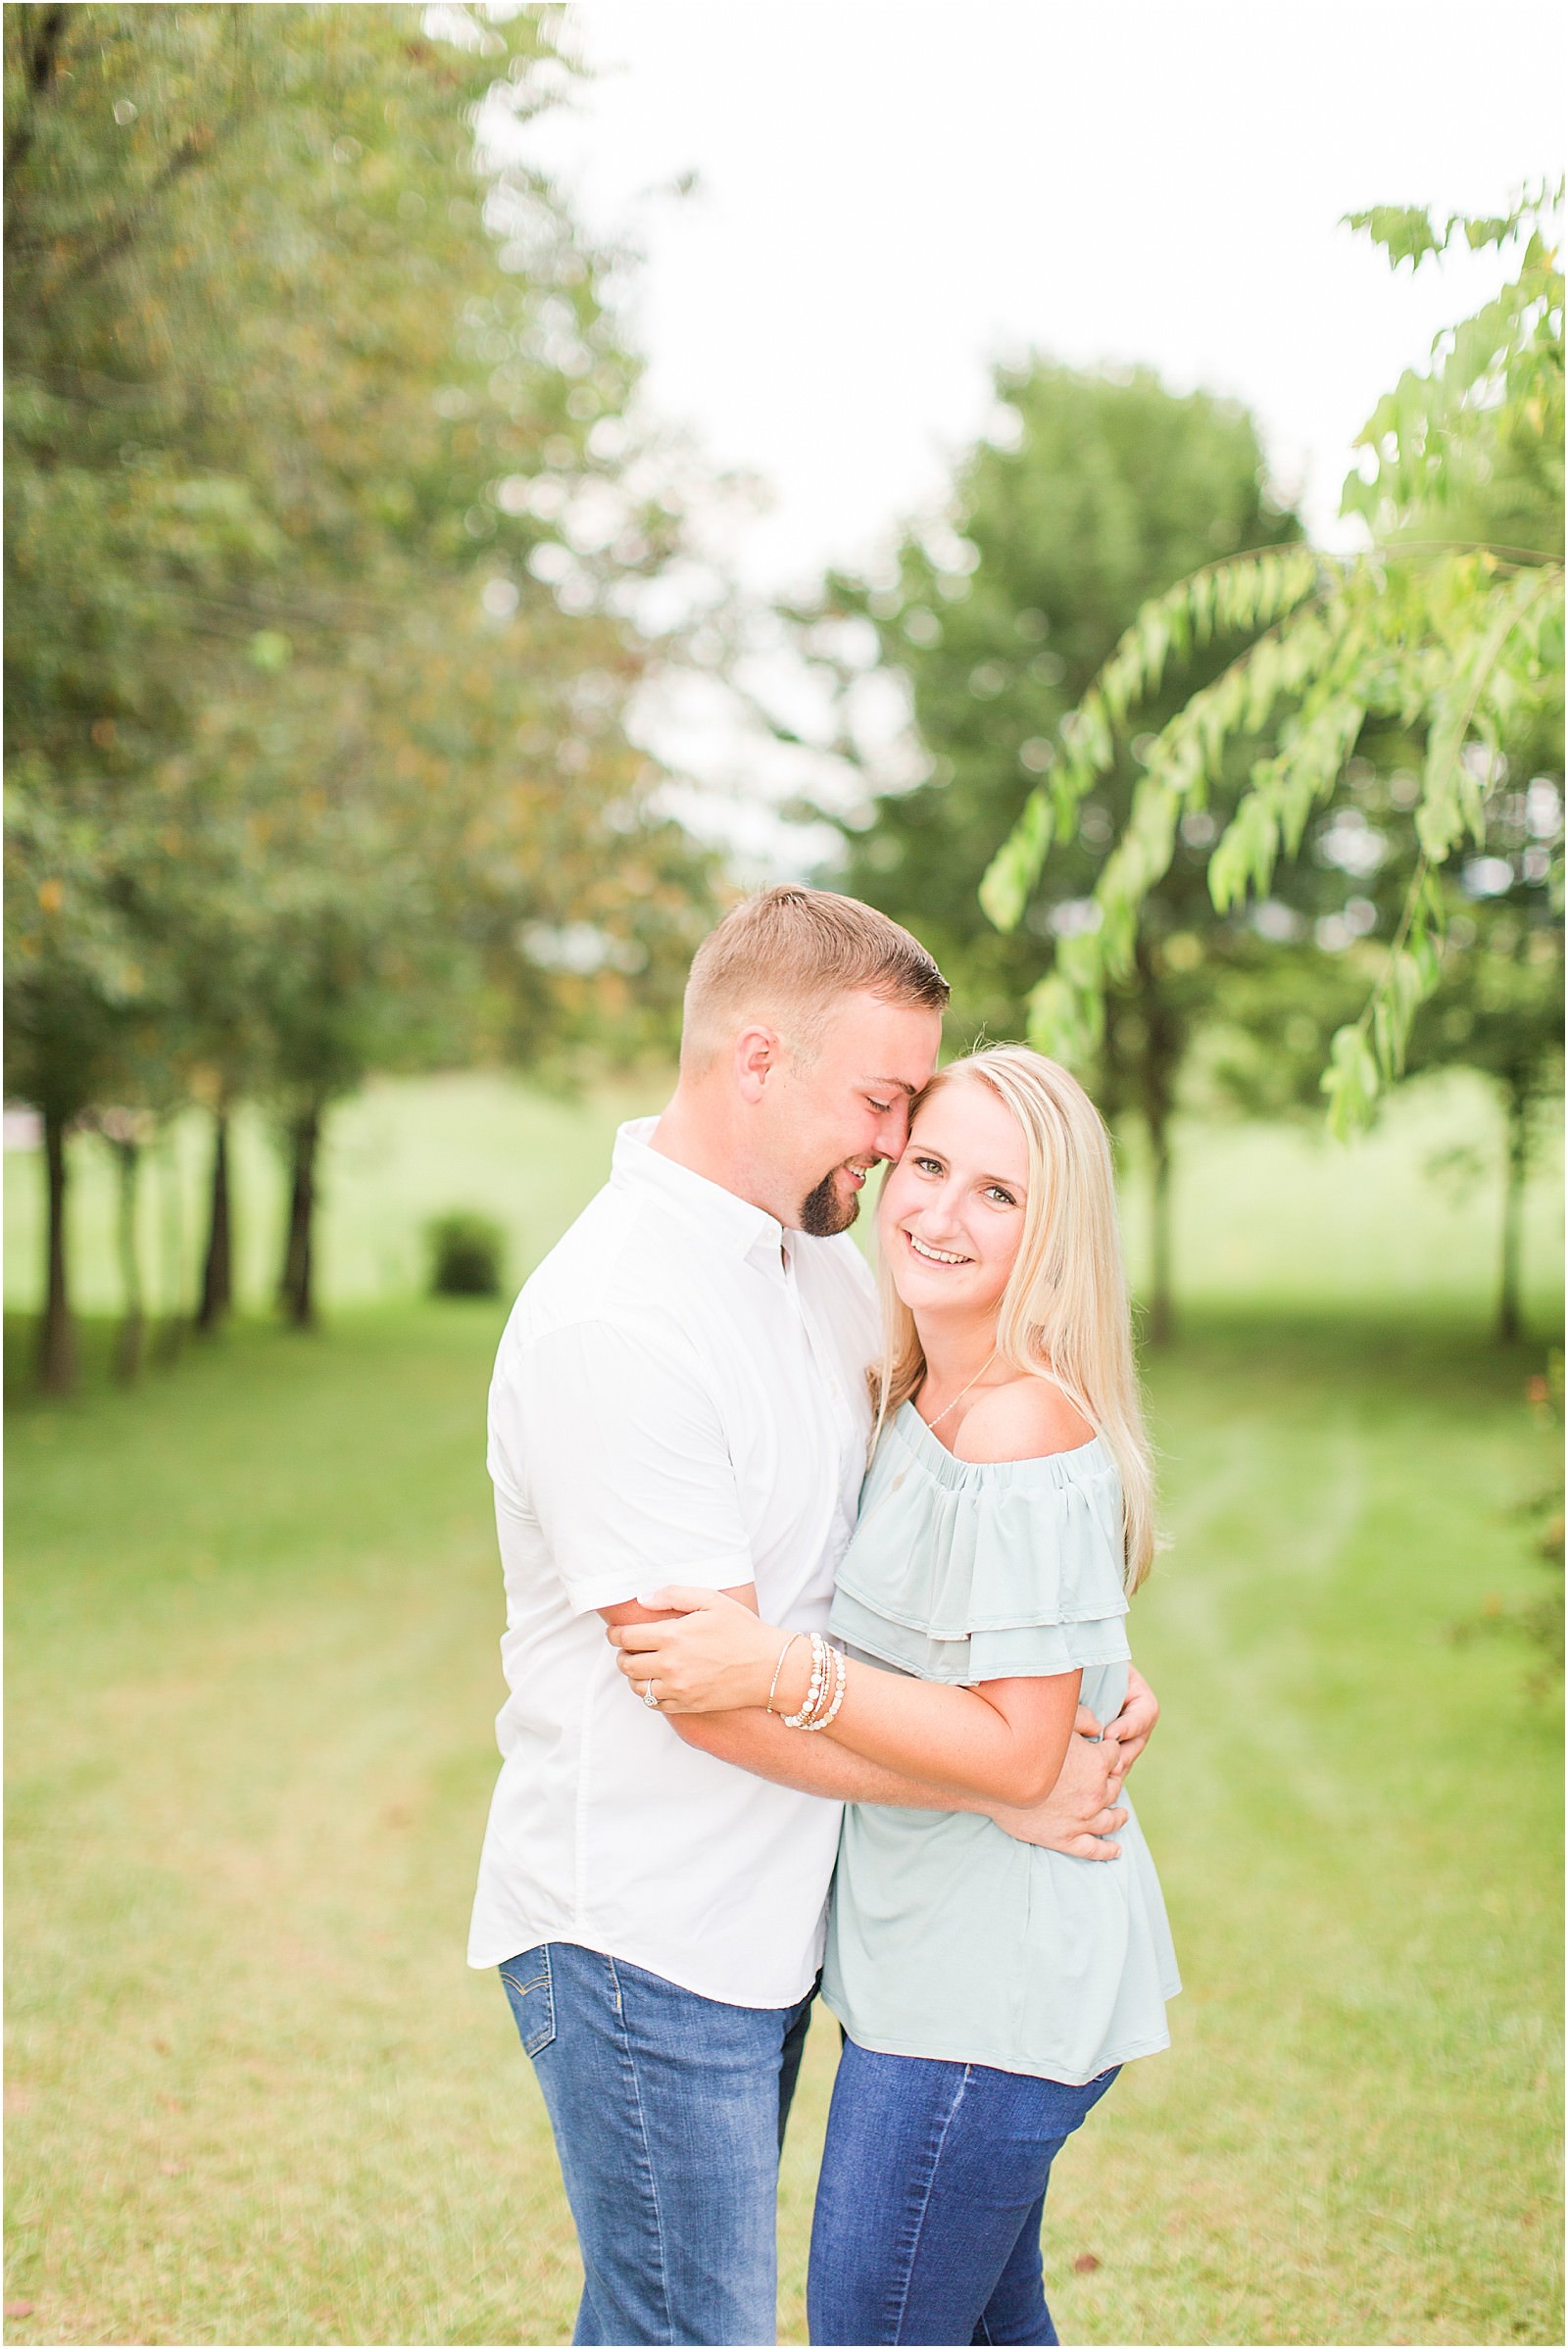 Lauren and Bryce | The Corner House B&ed and Breakfast Engagement Session | Bret and Brandie Photography 003.jpg